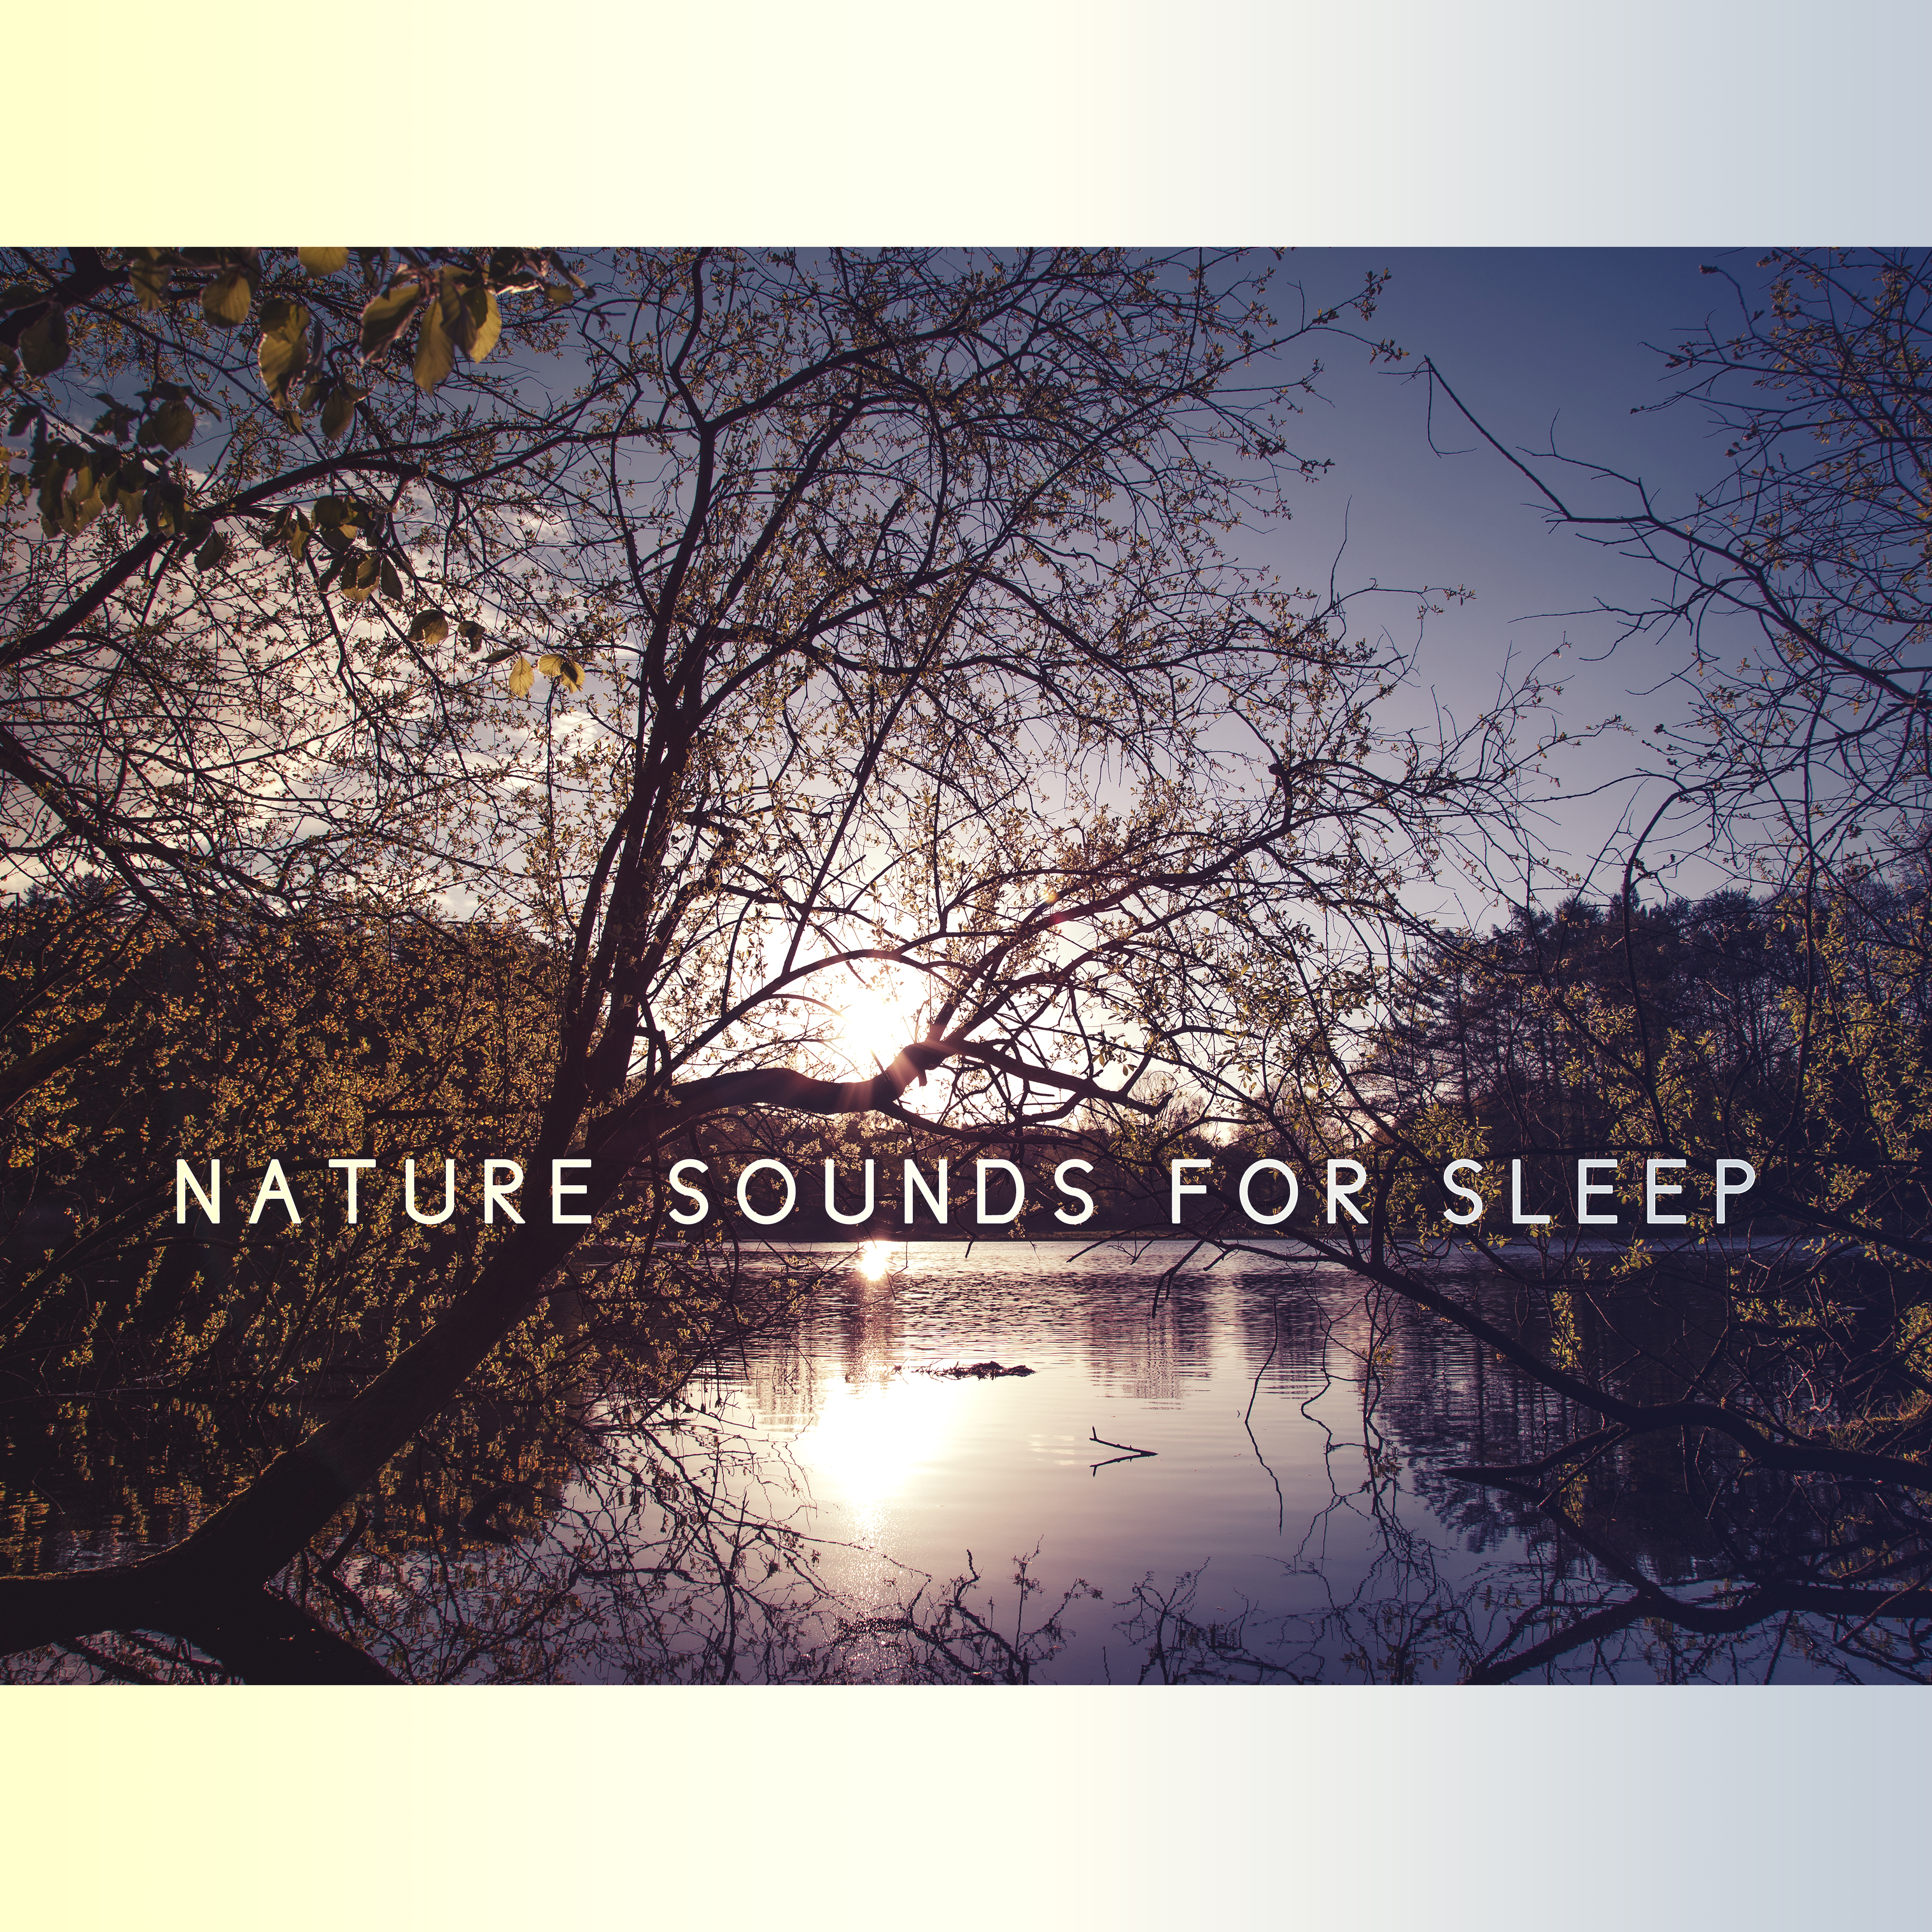 Nature Sounds for Sleep  Relaxation Bedtime, Stress Relief, Deep Dreams, Soothing Music at Goodnight, Sweet Nap, Calming Melodies to Bed, Restful Sleep